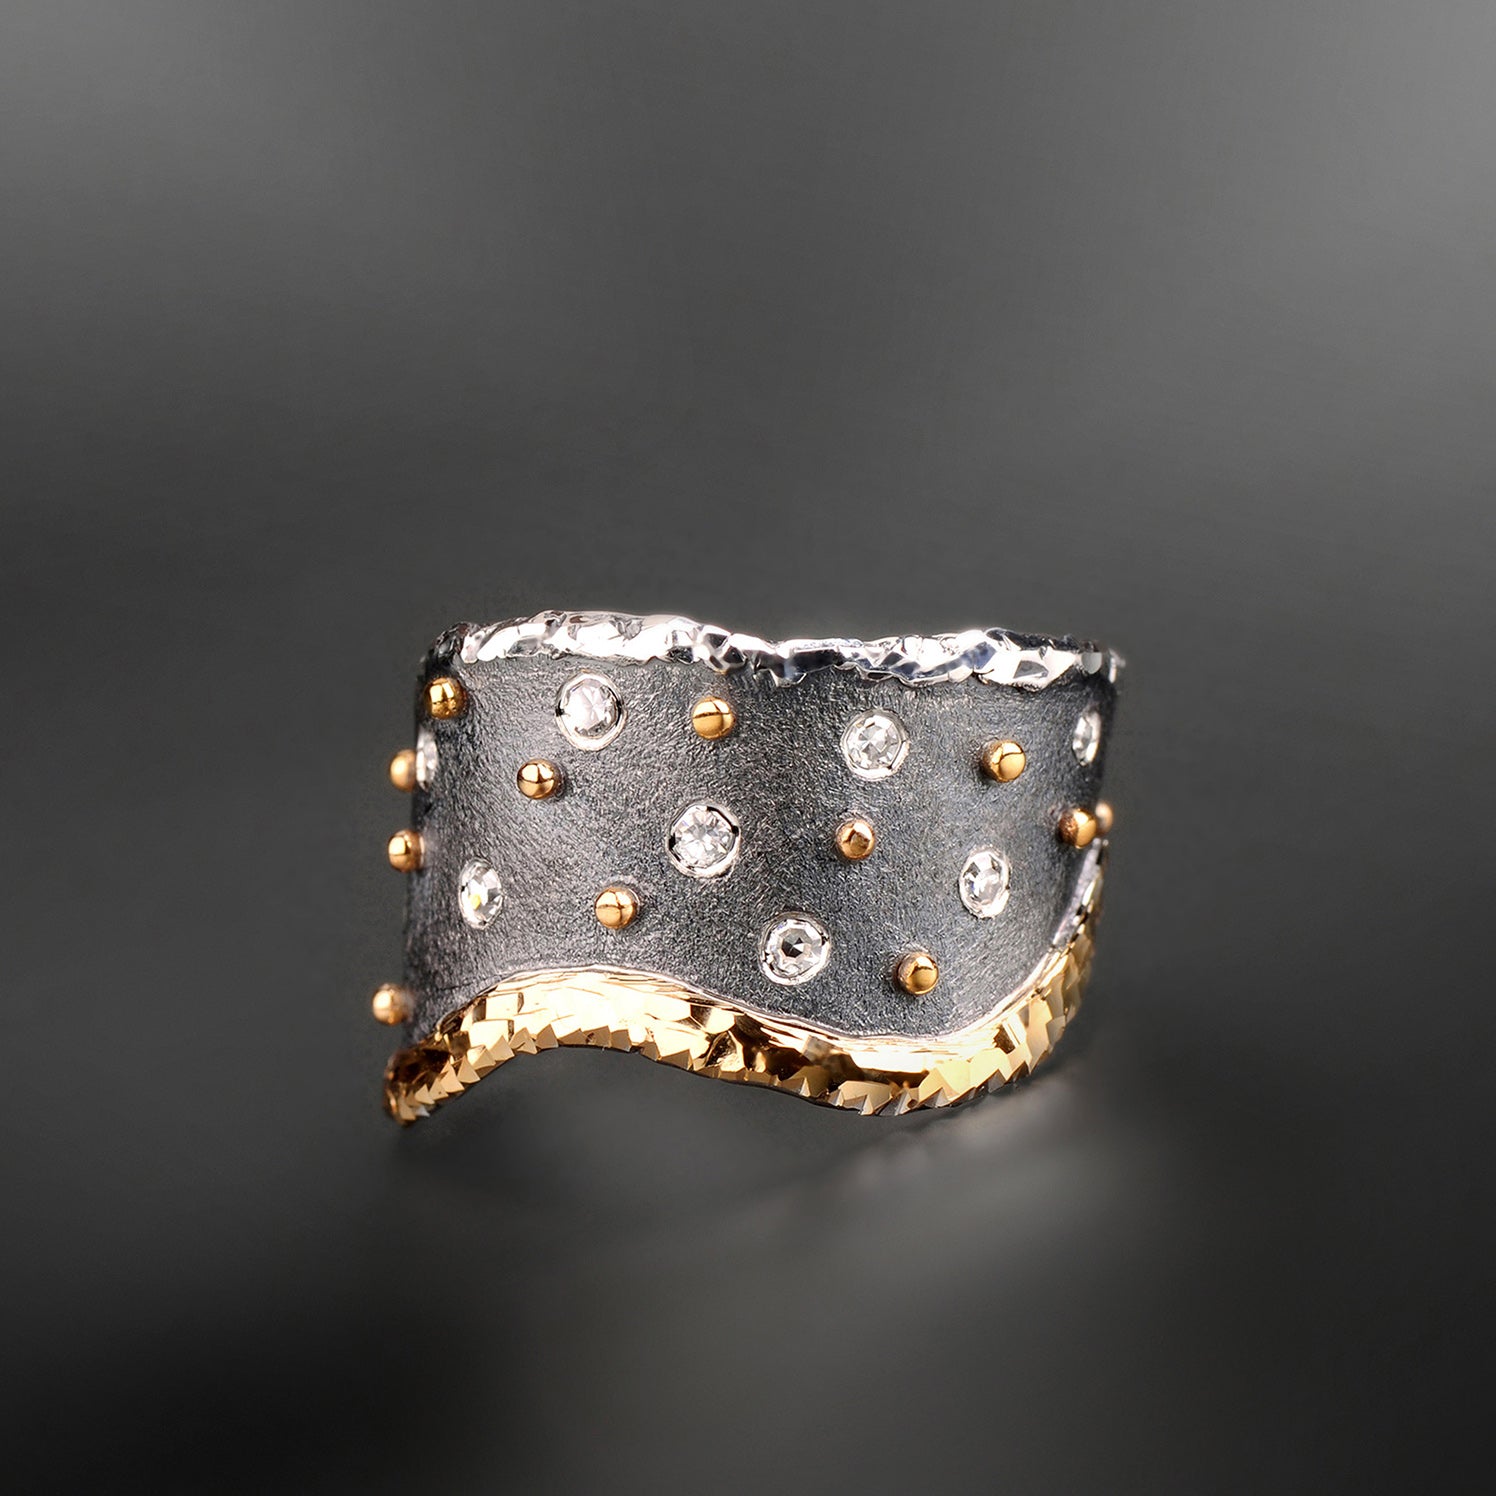 Celestial Shower Diamond Ring by Margisa - Talisman Collection Fine Jewelers